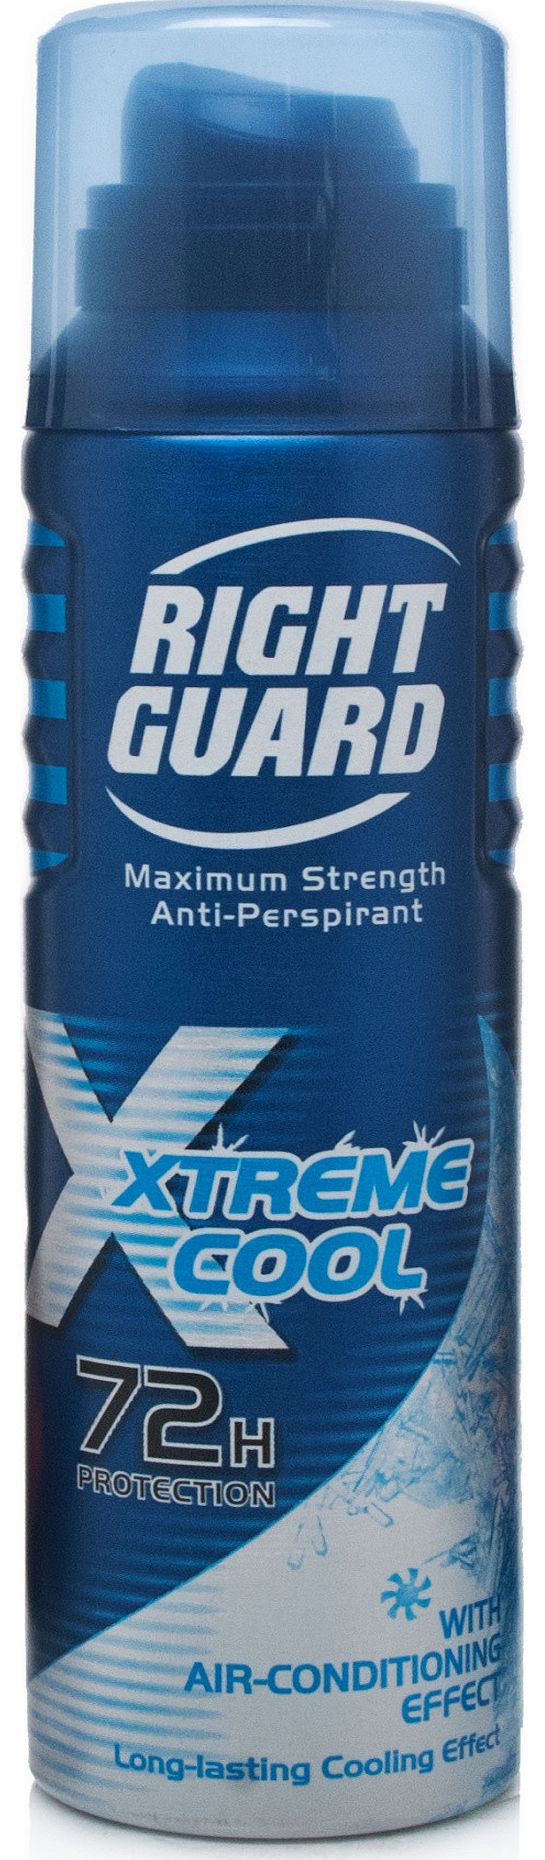 Right Guard Xtreme Cool Air-Conditioning Effect